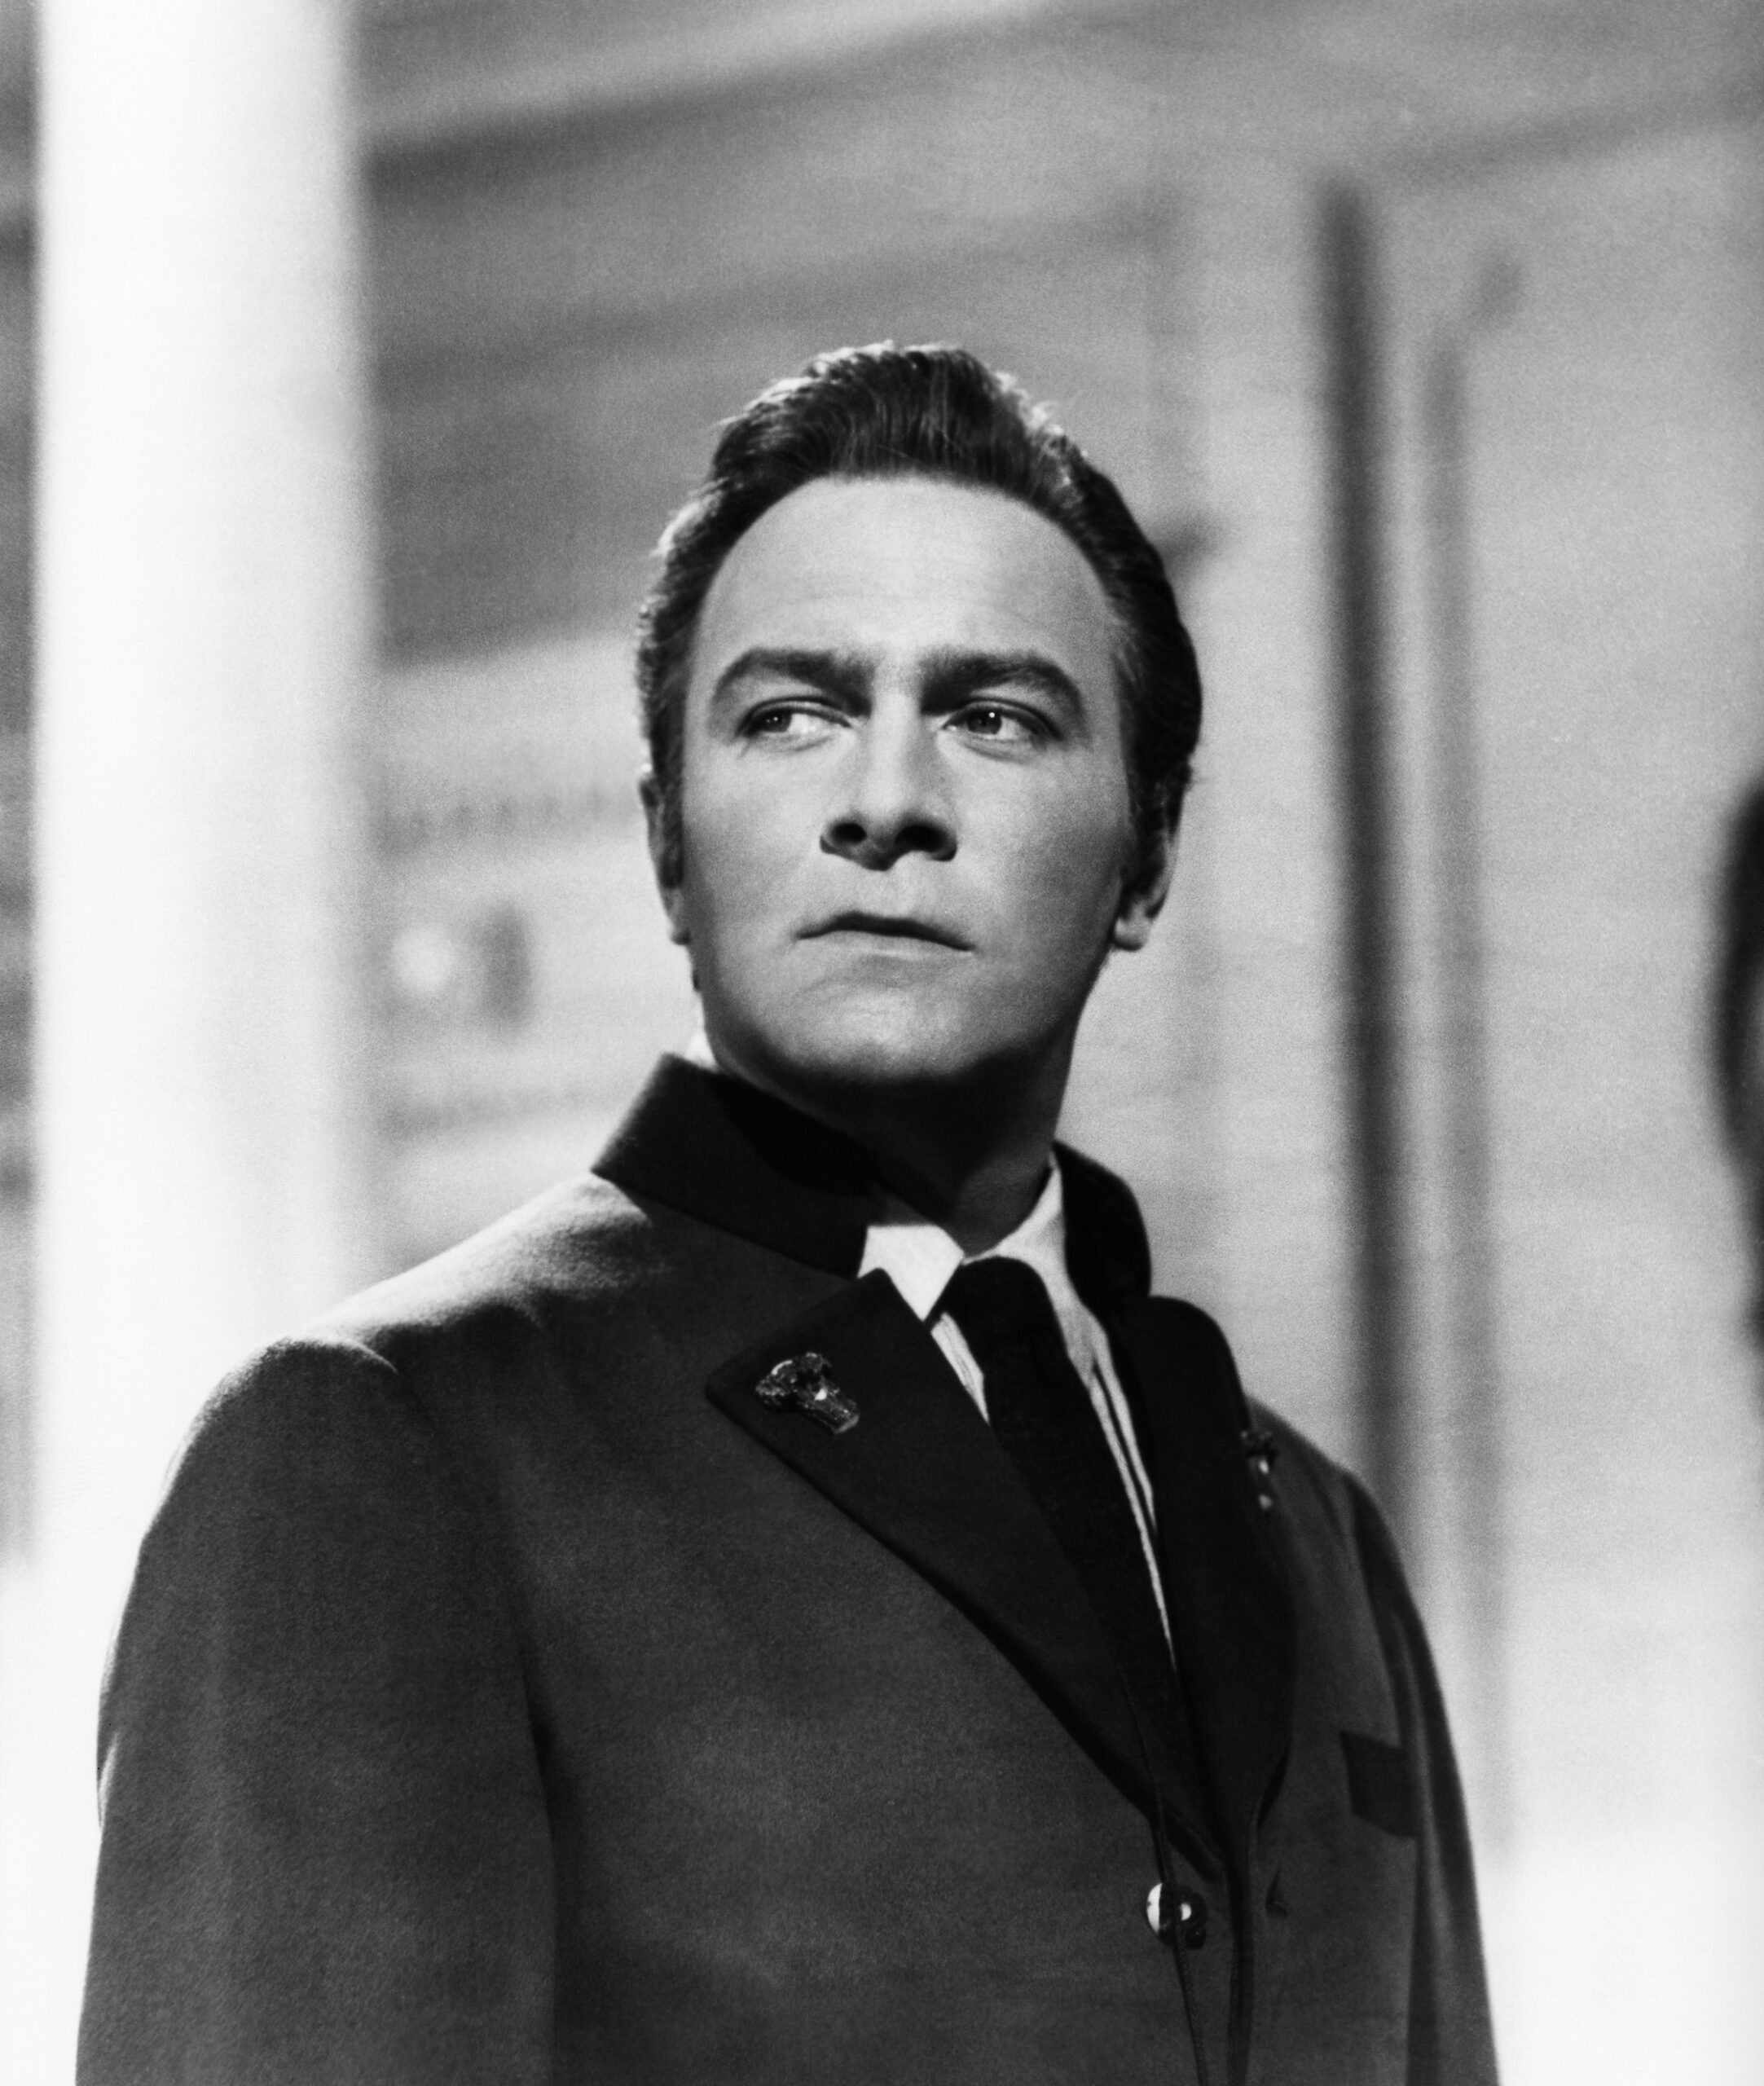 'The Sound Of Music': Christopher Plummer's After-Hours Festivities With The Nuns